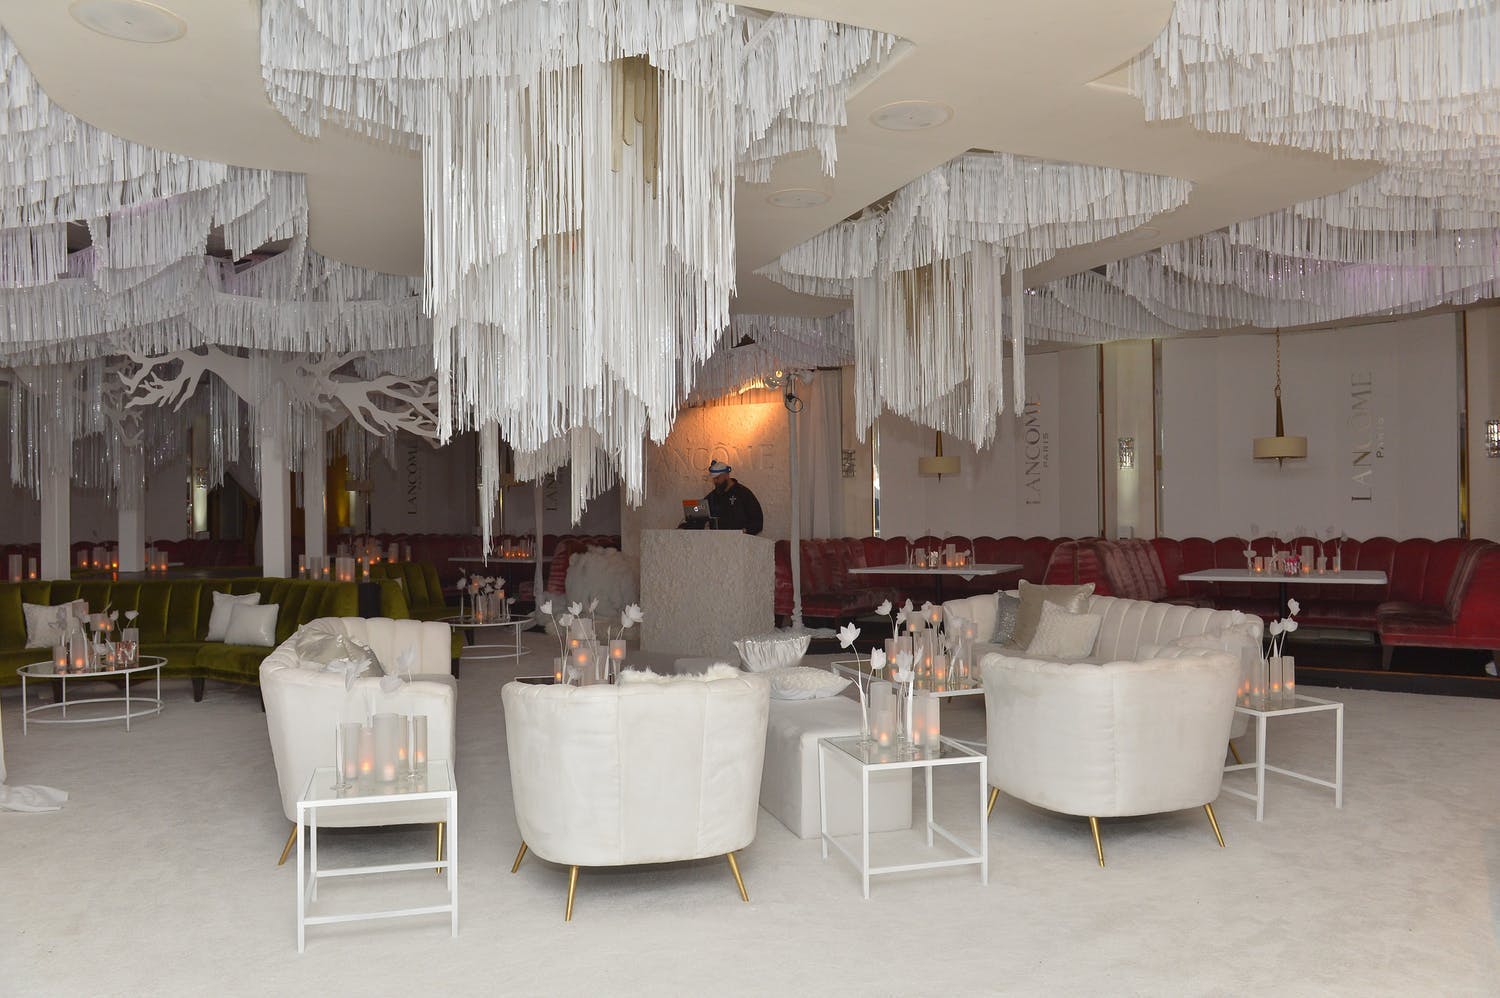 LANCÔME X VOGUE HOLIDAY EVENT WITH WHITE FRINGE CEILING DÉCOR | PARTYSLATE